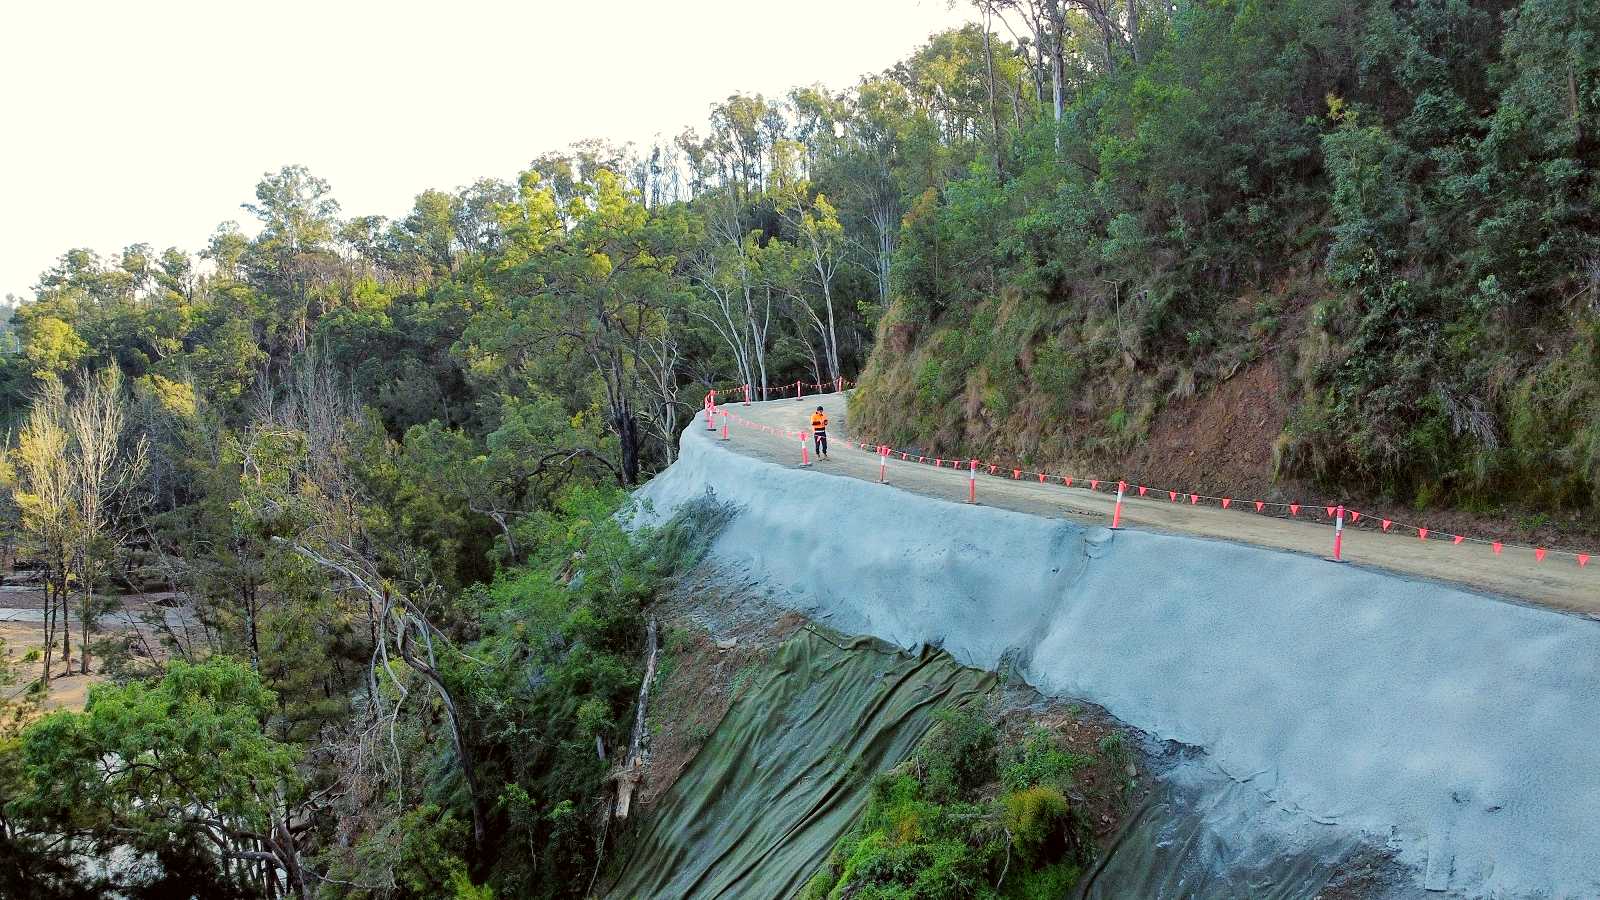 The downhill slope of a road is coated in shotcrete, in a steep forested area. 